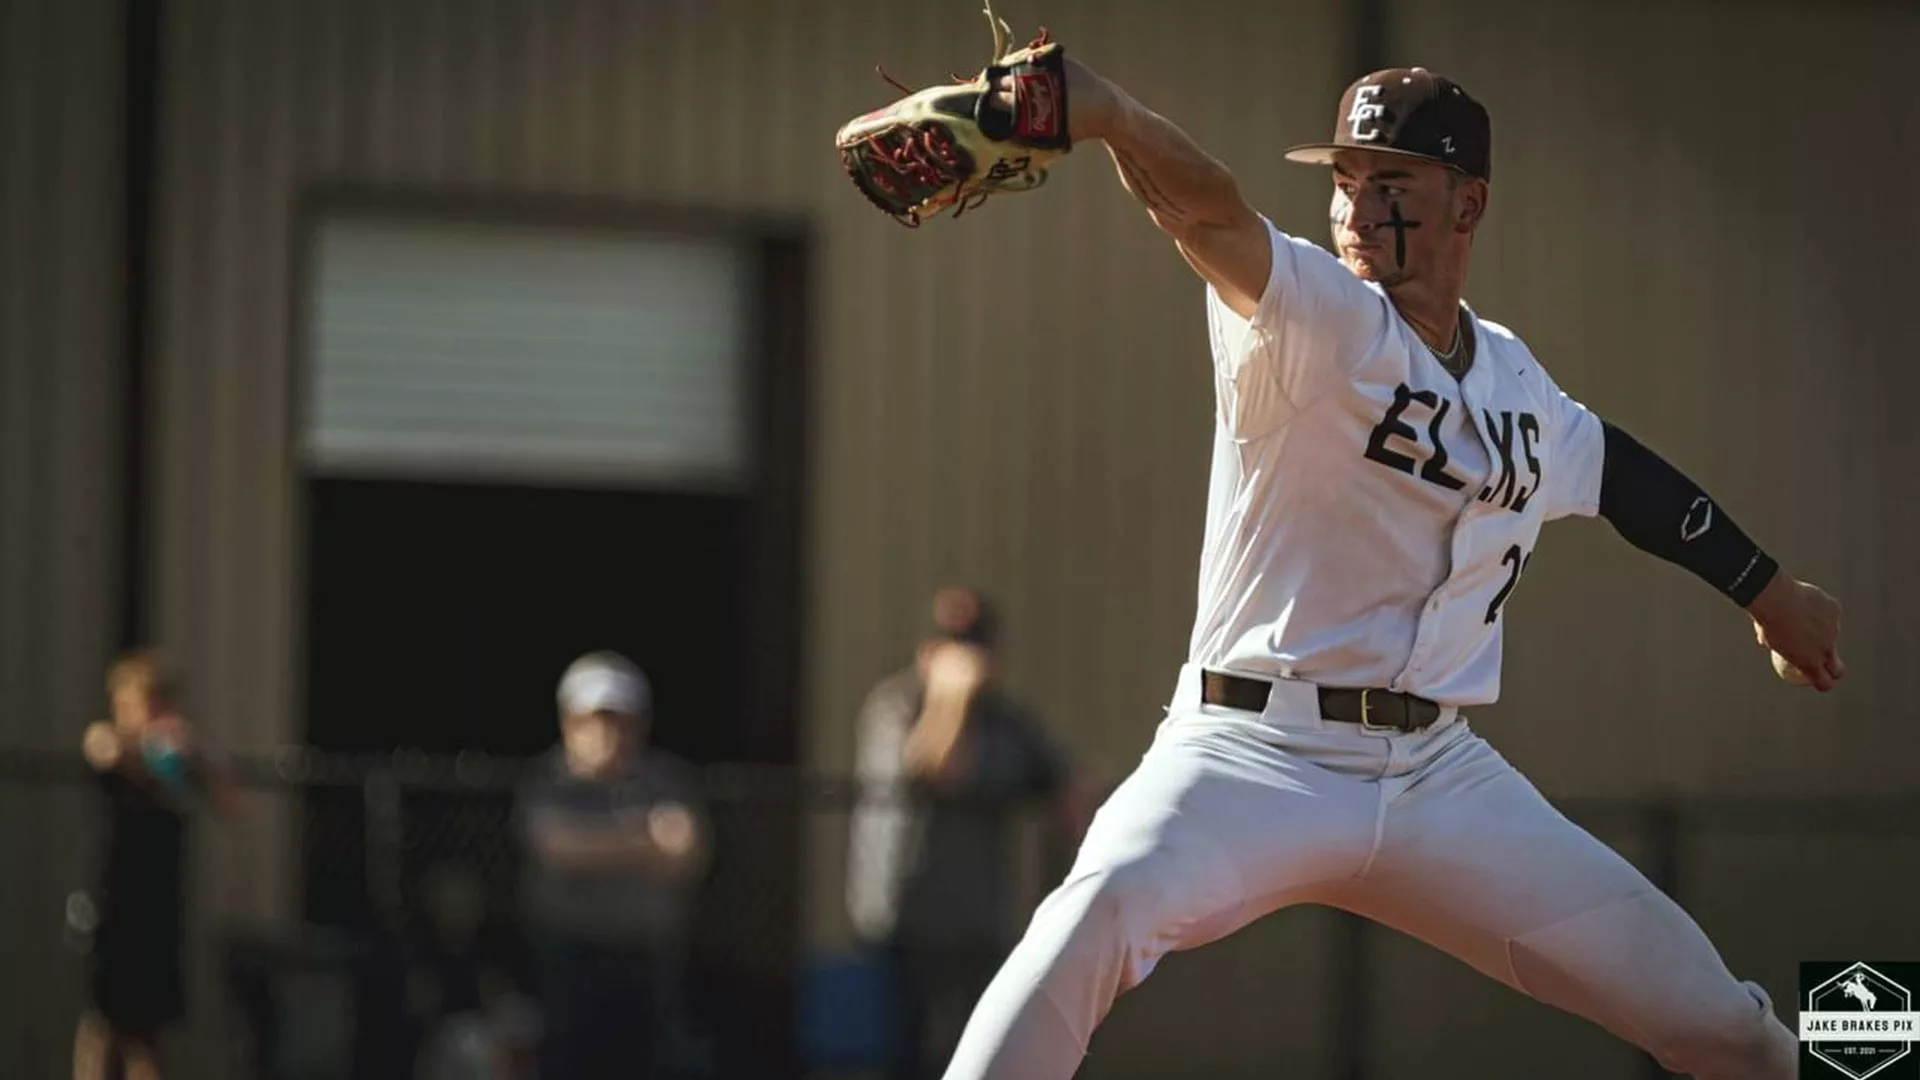 Kash Mayfield mid-pitch during a game for the Elk City Elks baseball team.